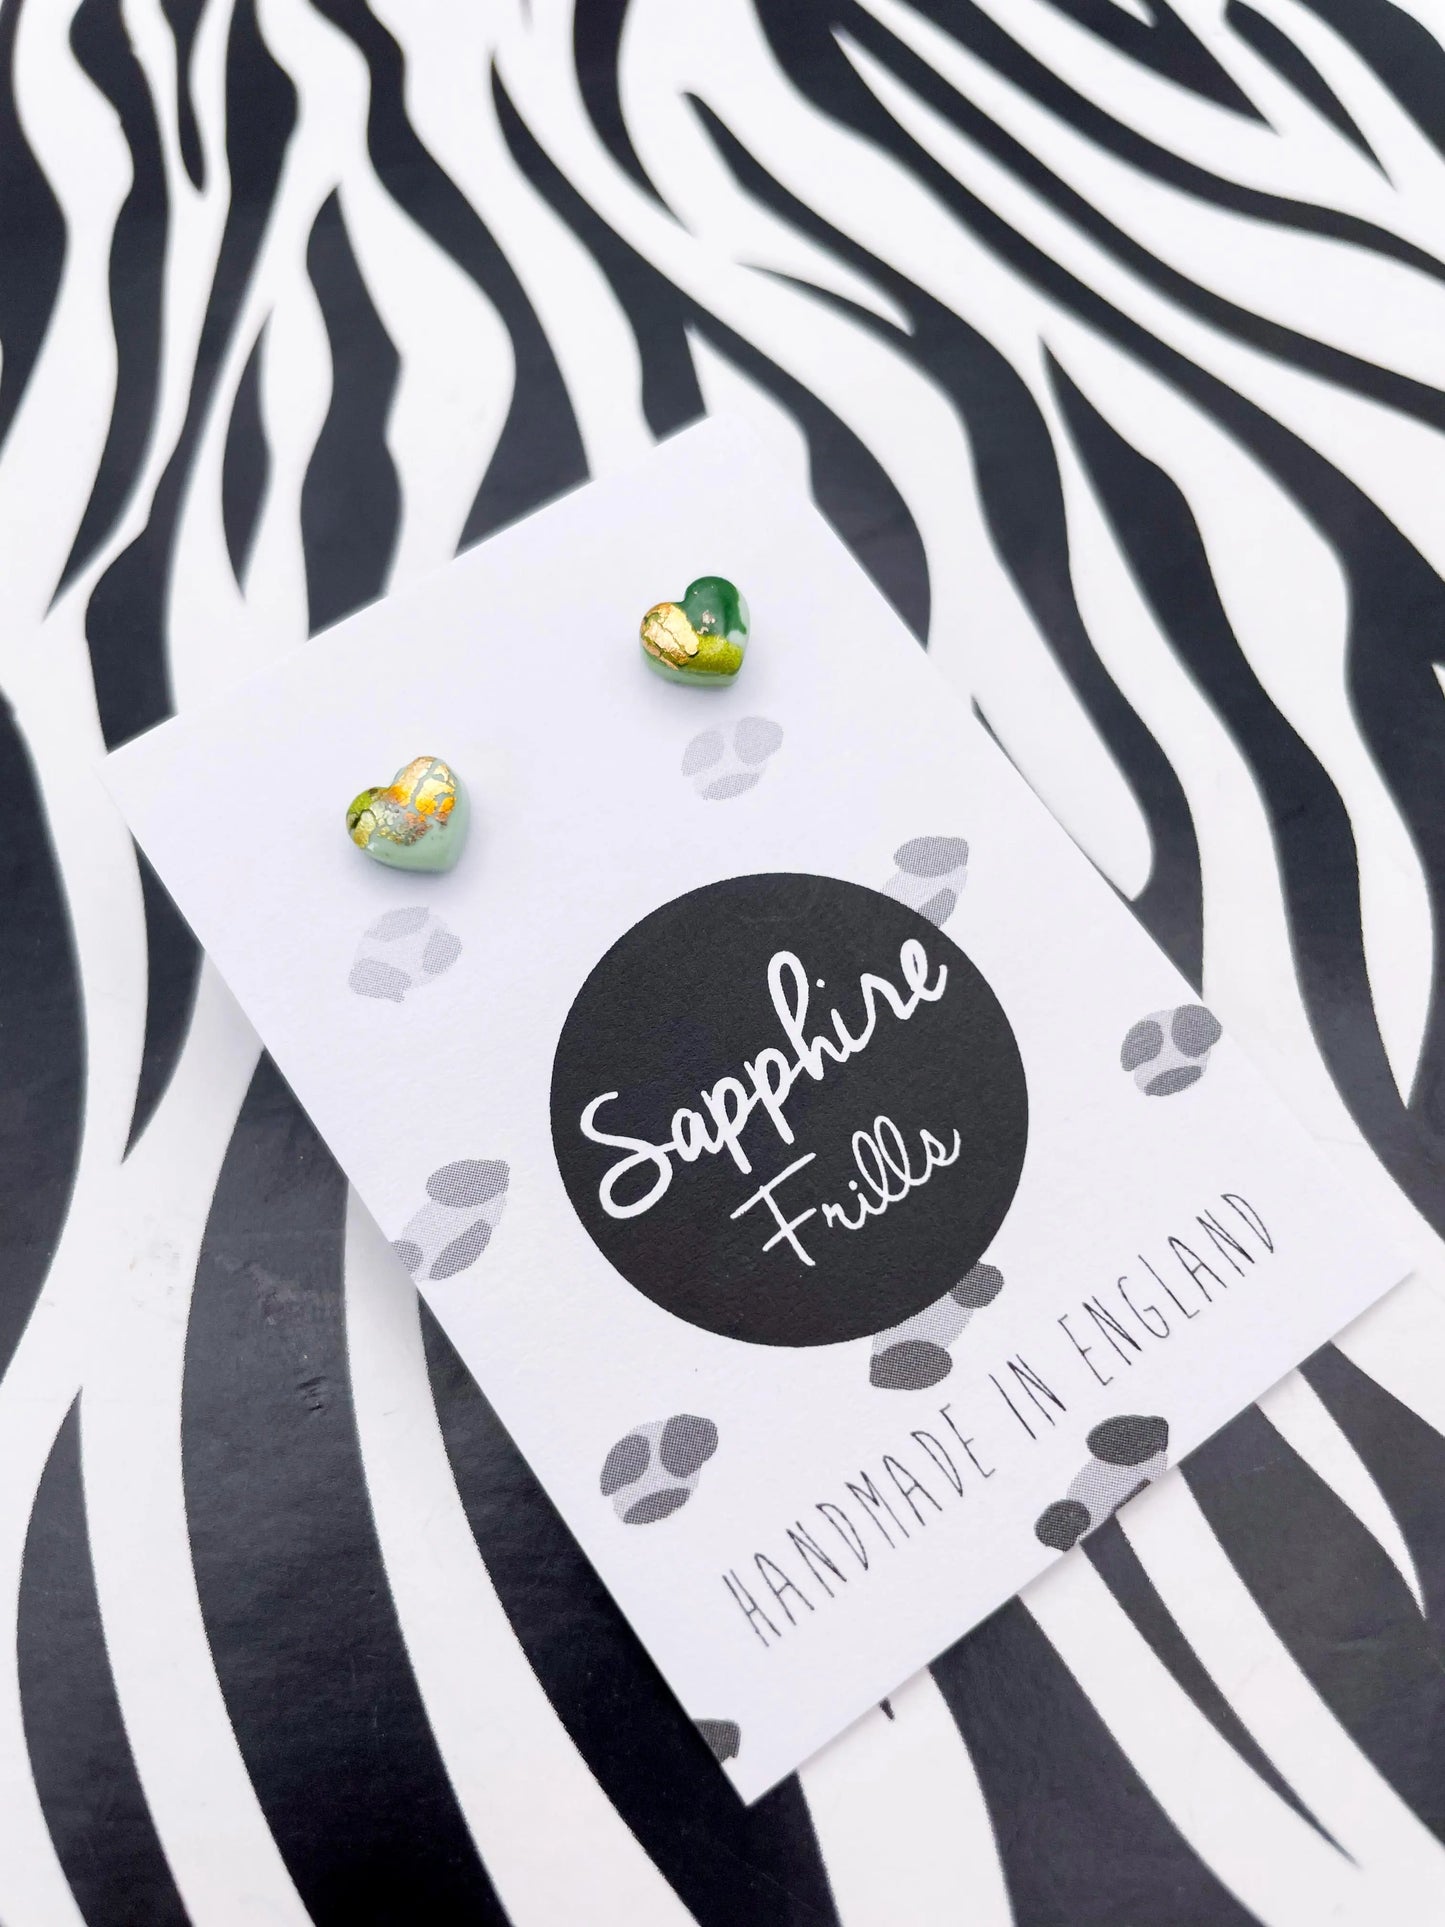 Micro Green Smudge with Snake Print Foil Heart Stud Earrings from Sapphire Frills